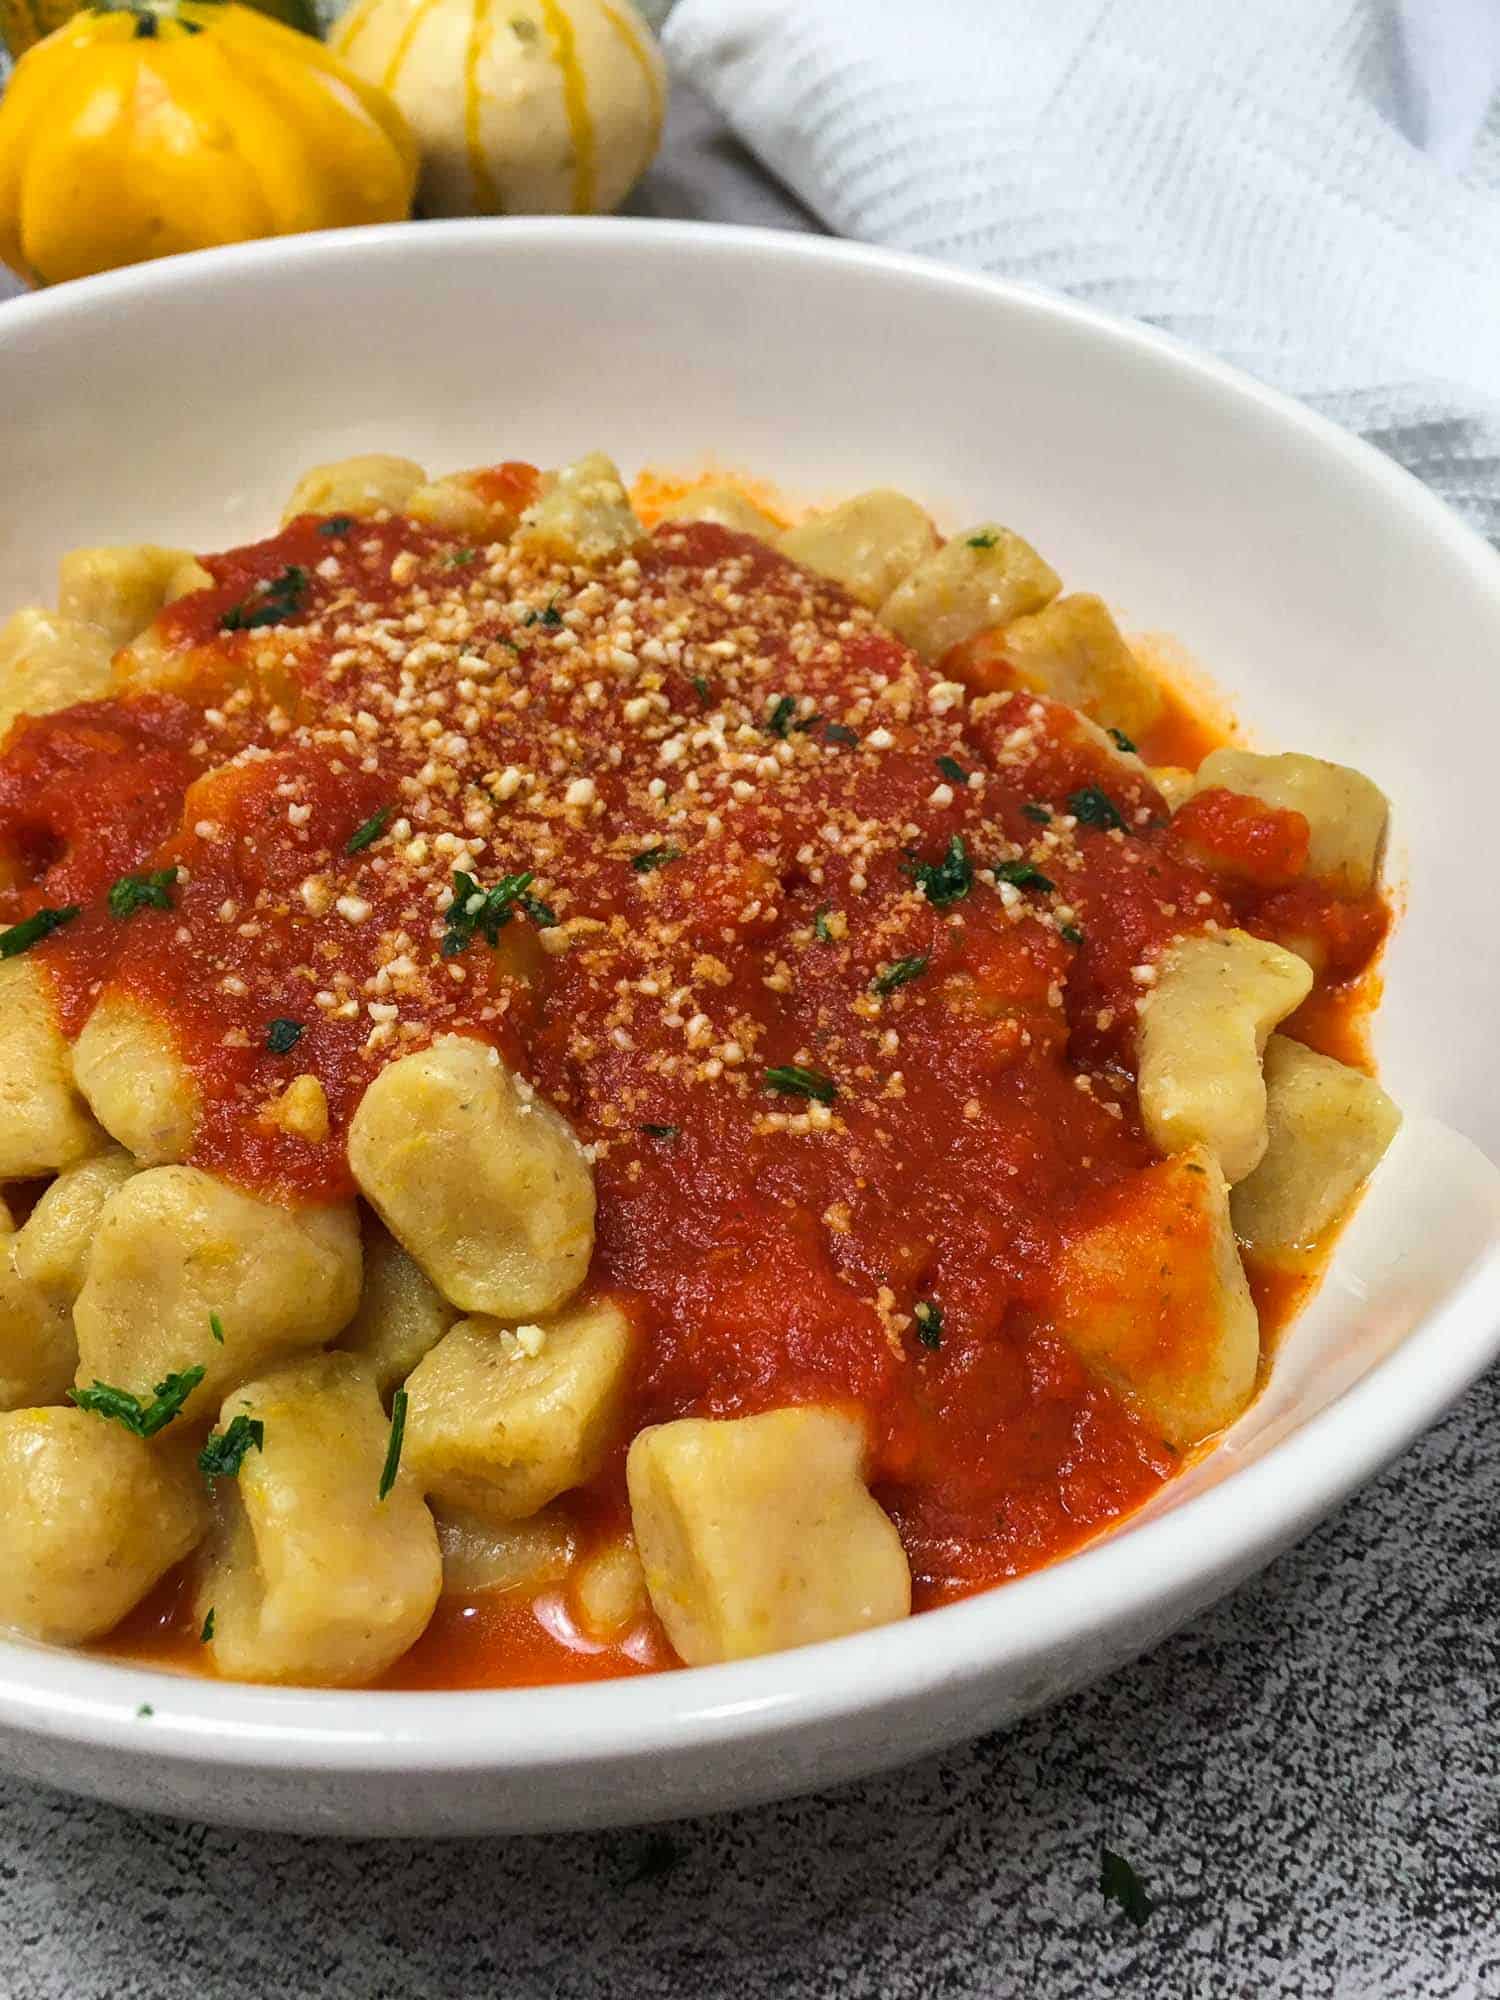 Pumpkin gnocchi in bowl with tomato sauce and parsley on top.